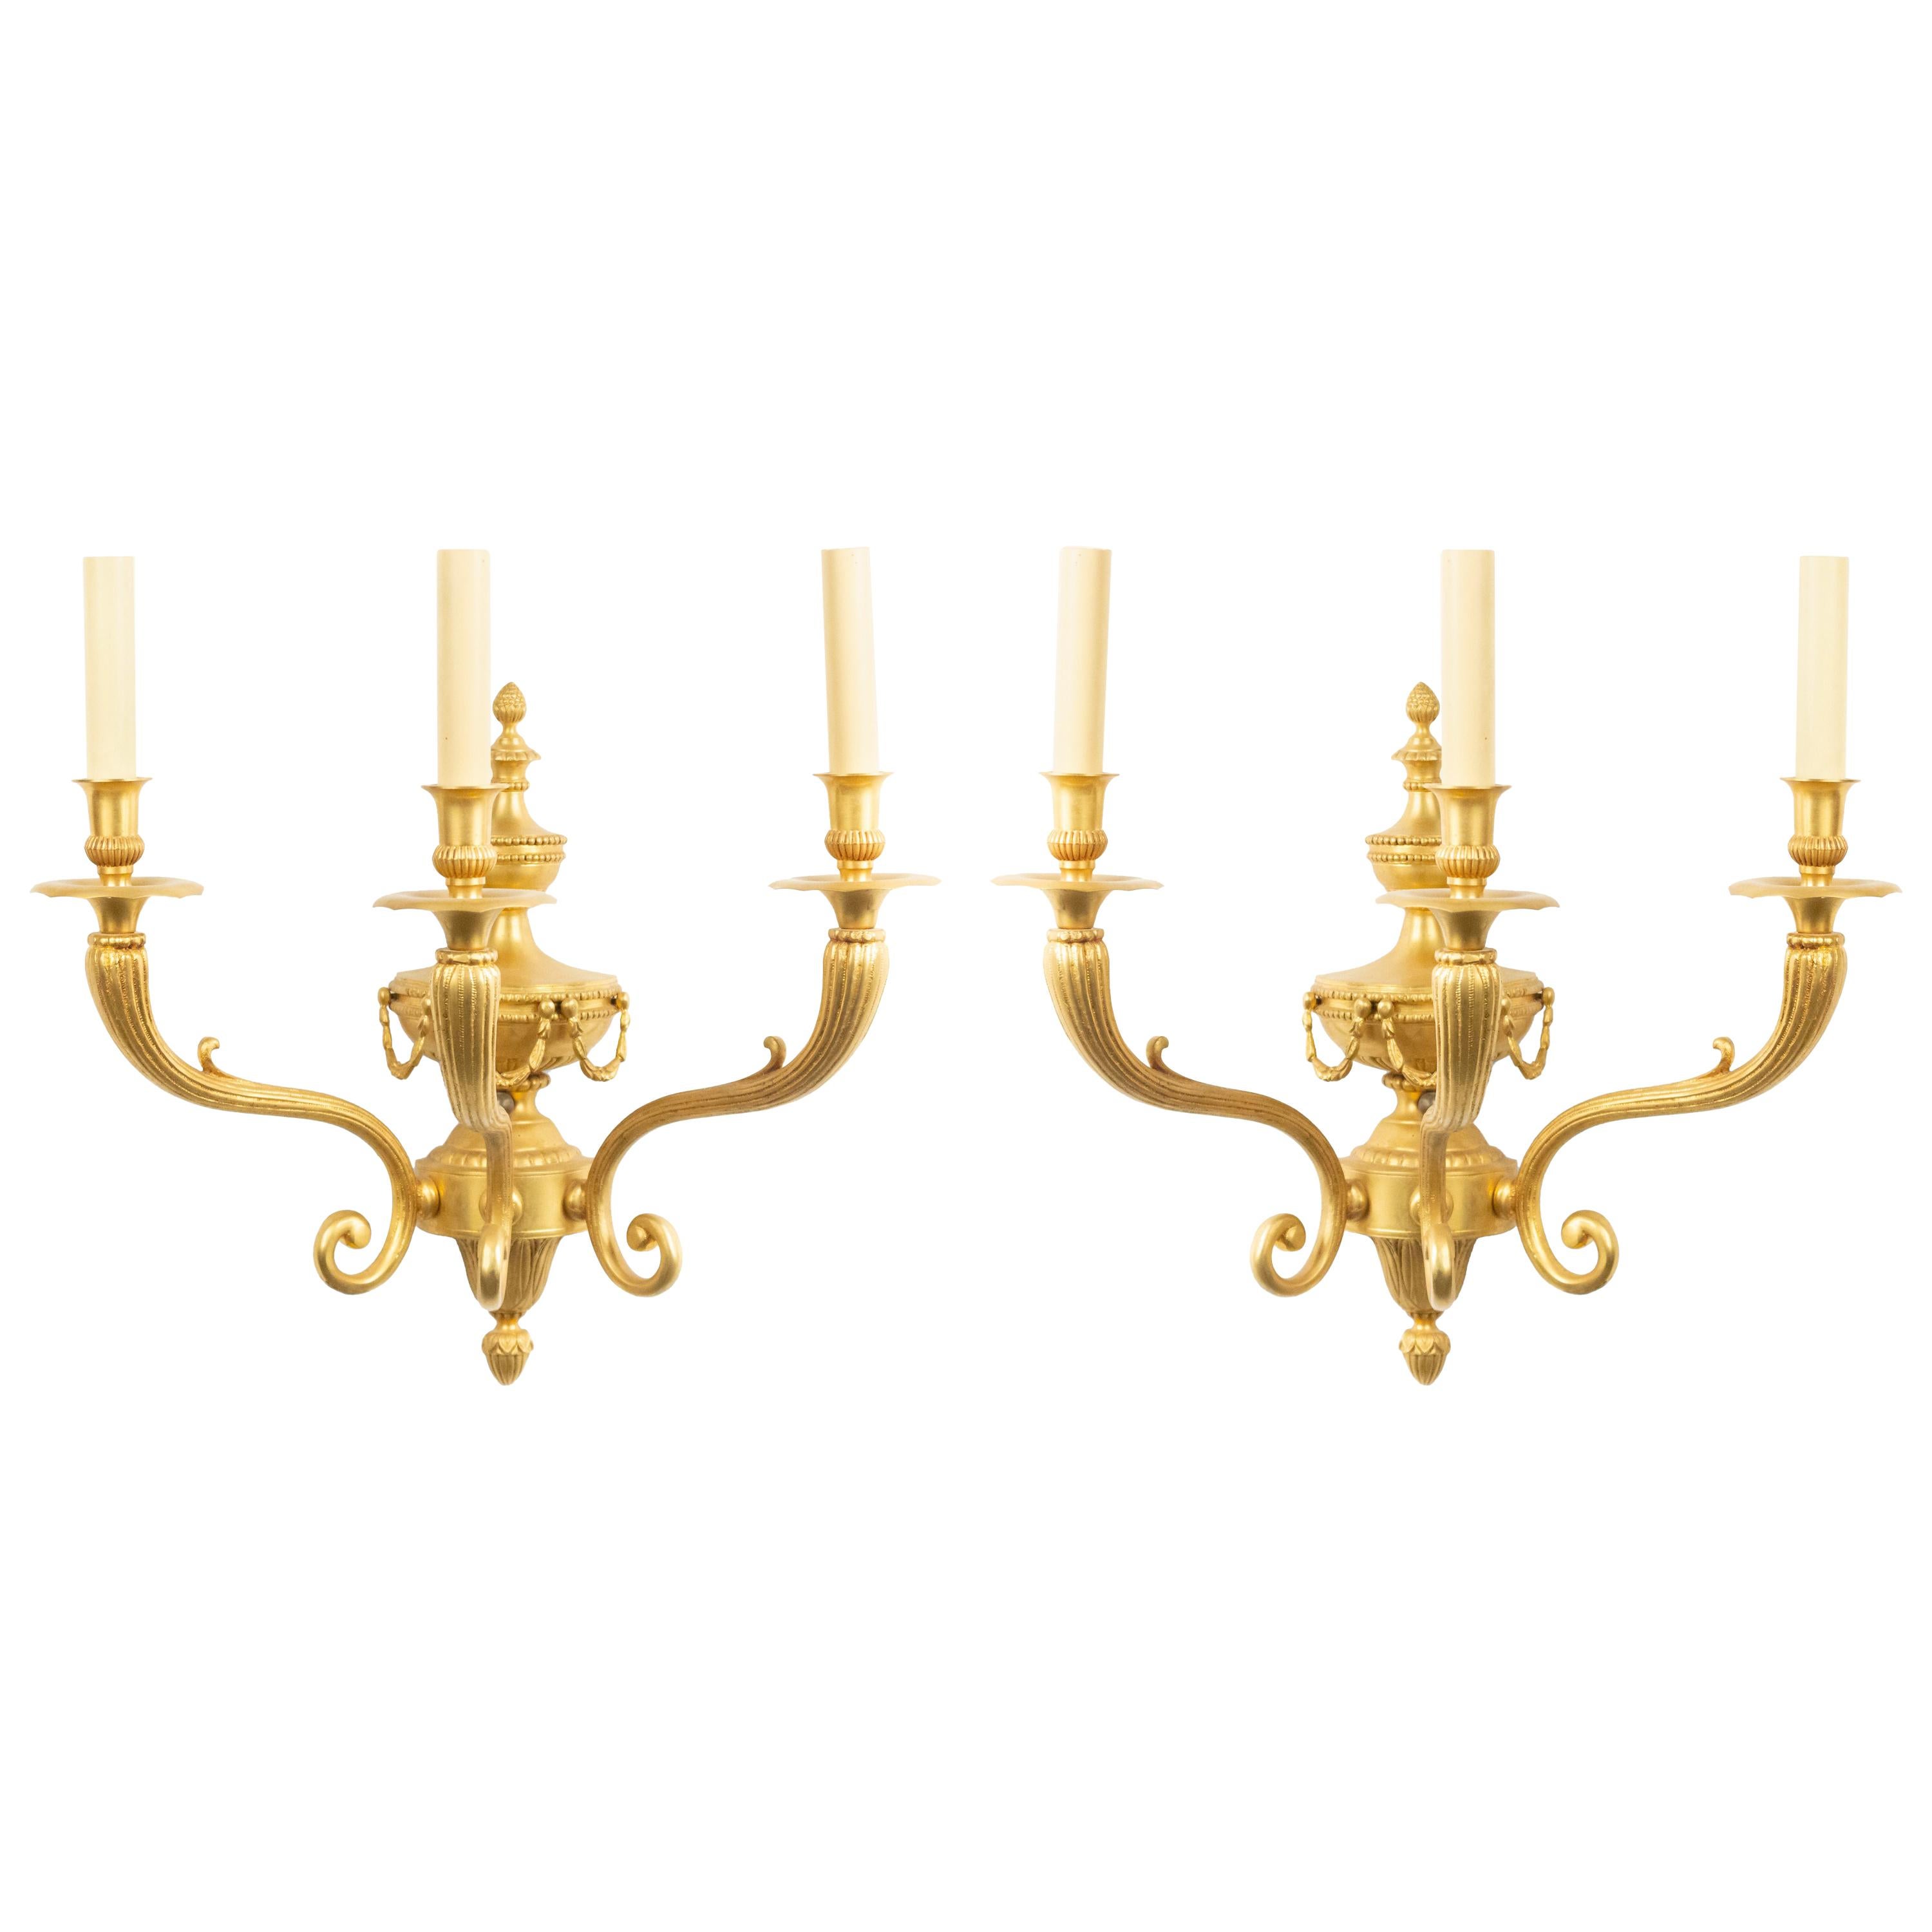 English Adam Style Bronze Dore Wall Sconces For Sale